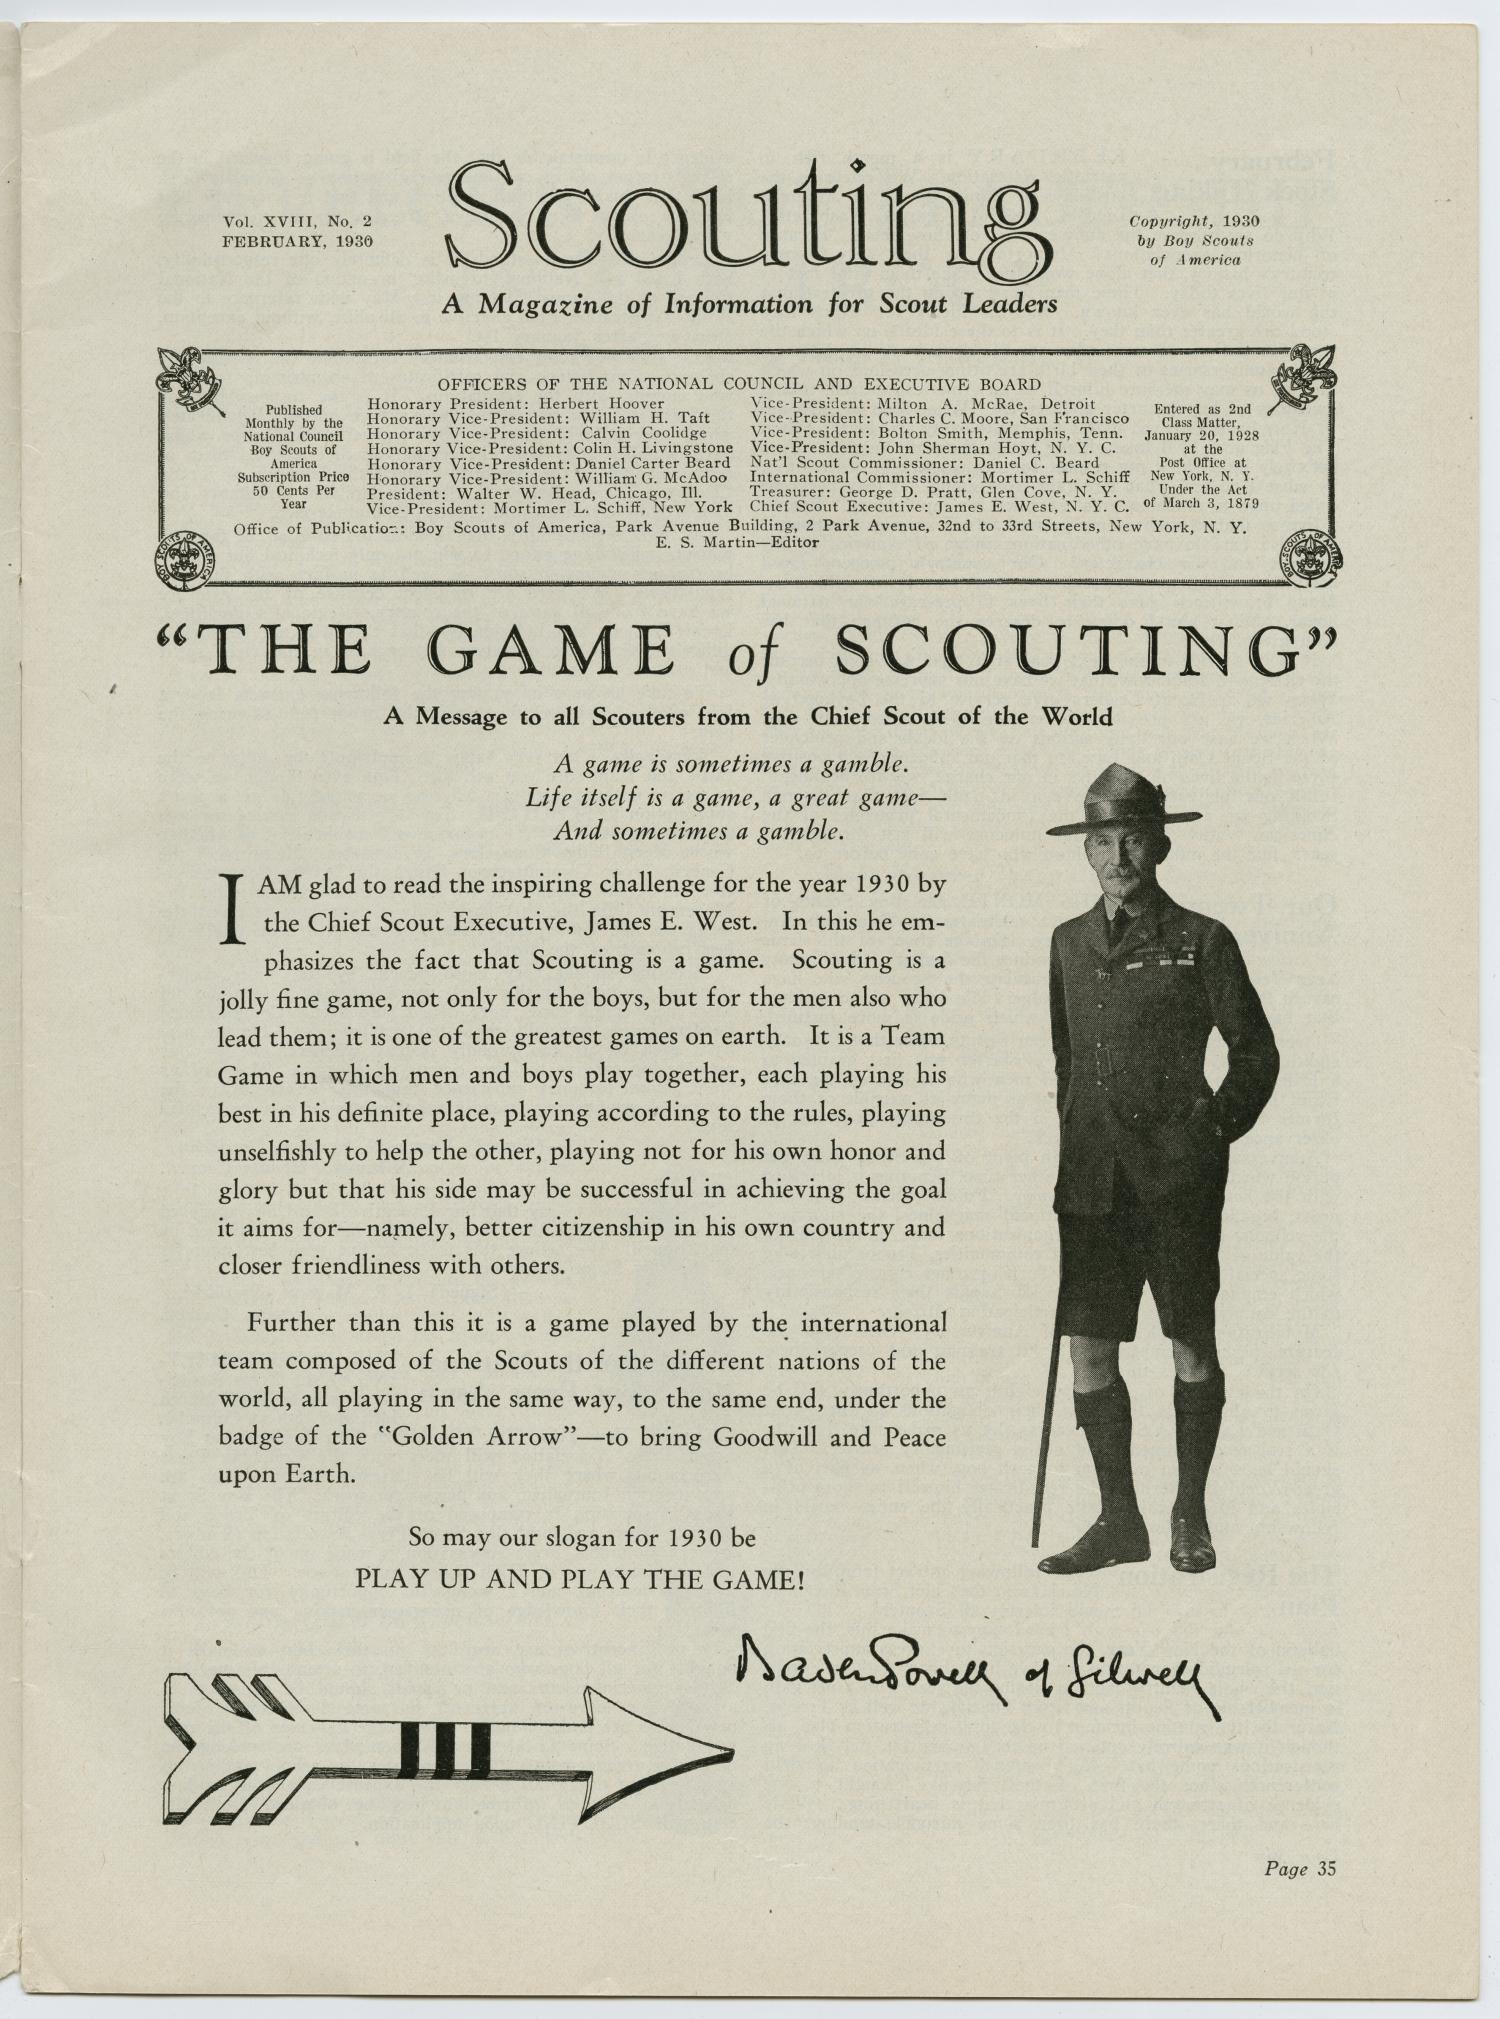 Scouting, Volume 18, Number 2, February 1930
                                                
                                                    35
                                                